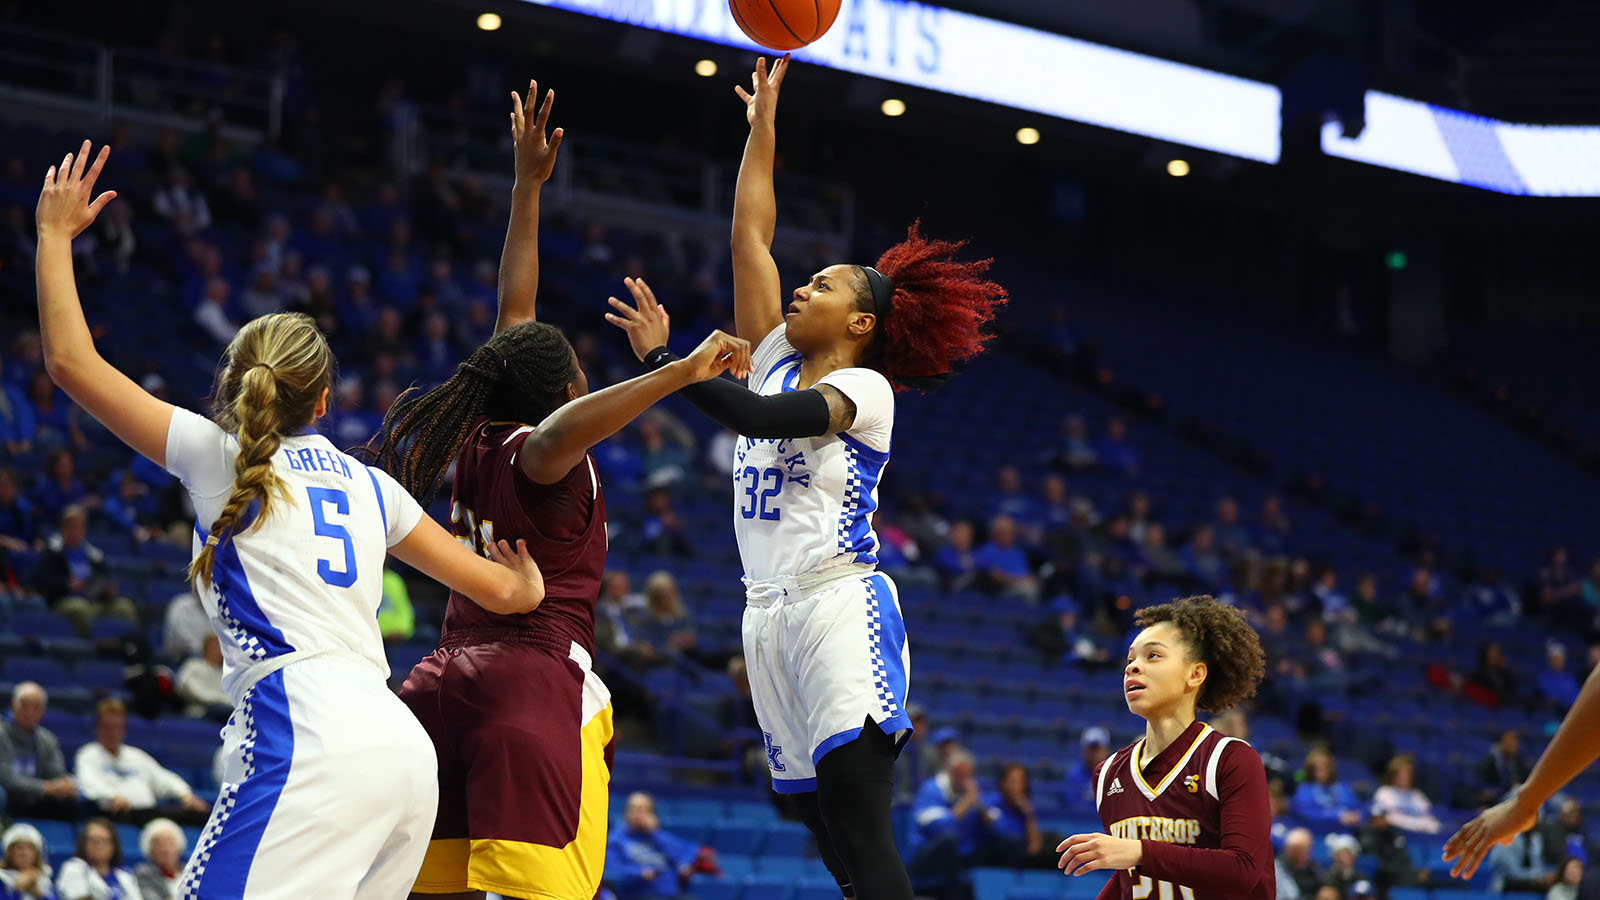 Roper's Career Day Carries Cats Past Winthrop